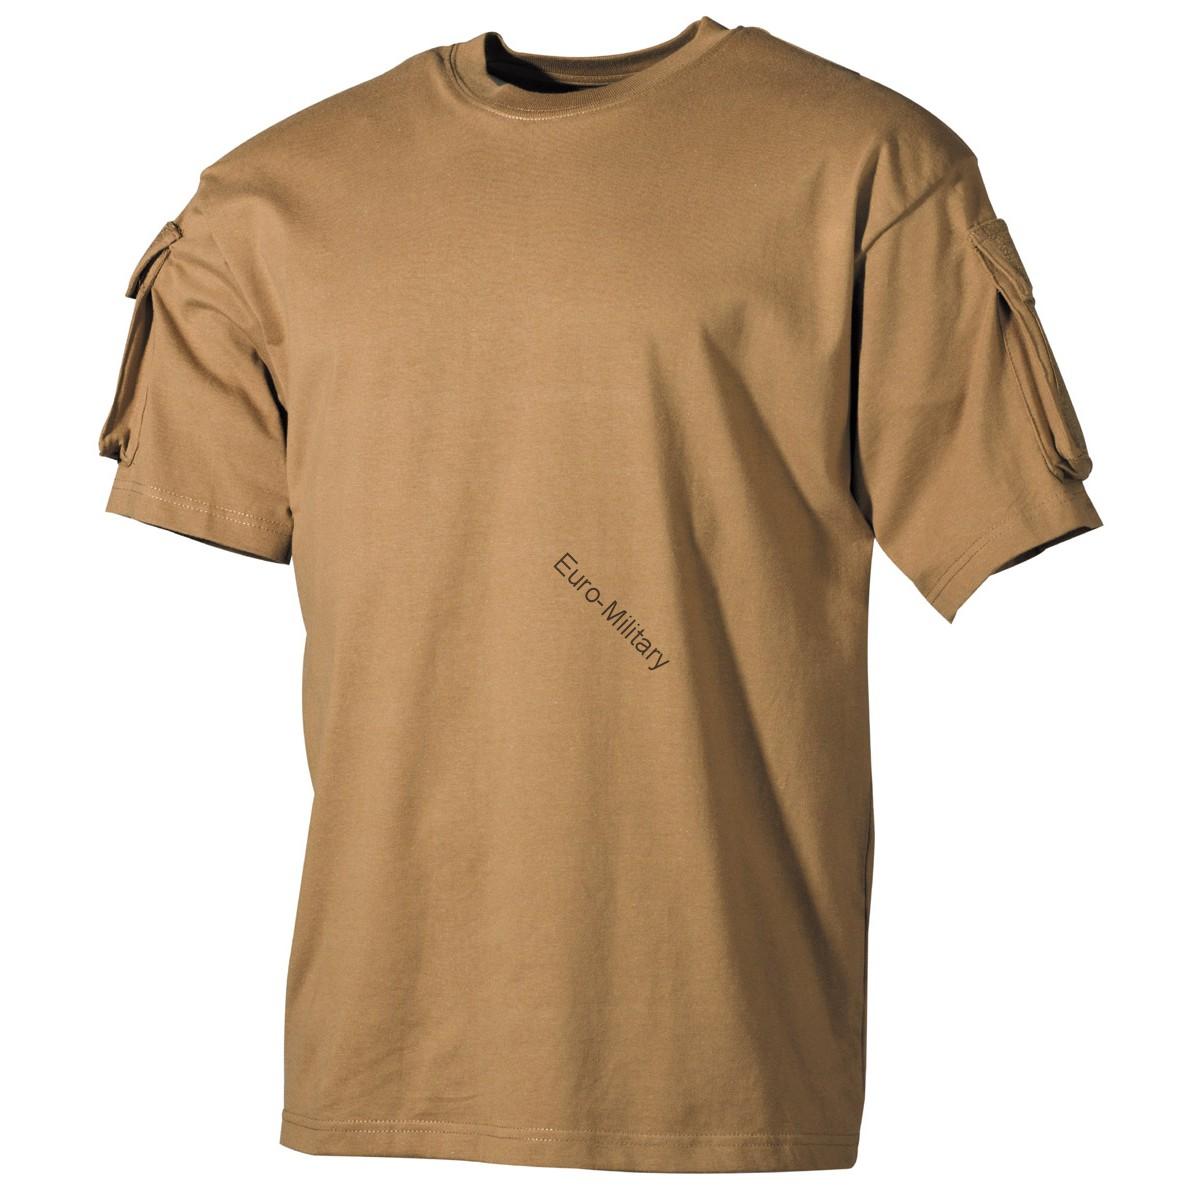 Tactical Military Army Special Ops Combat T-Shirt - Coyote - Short Sleeve